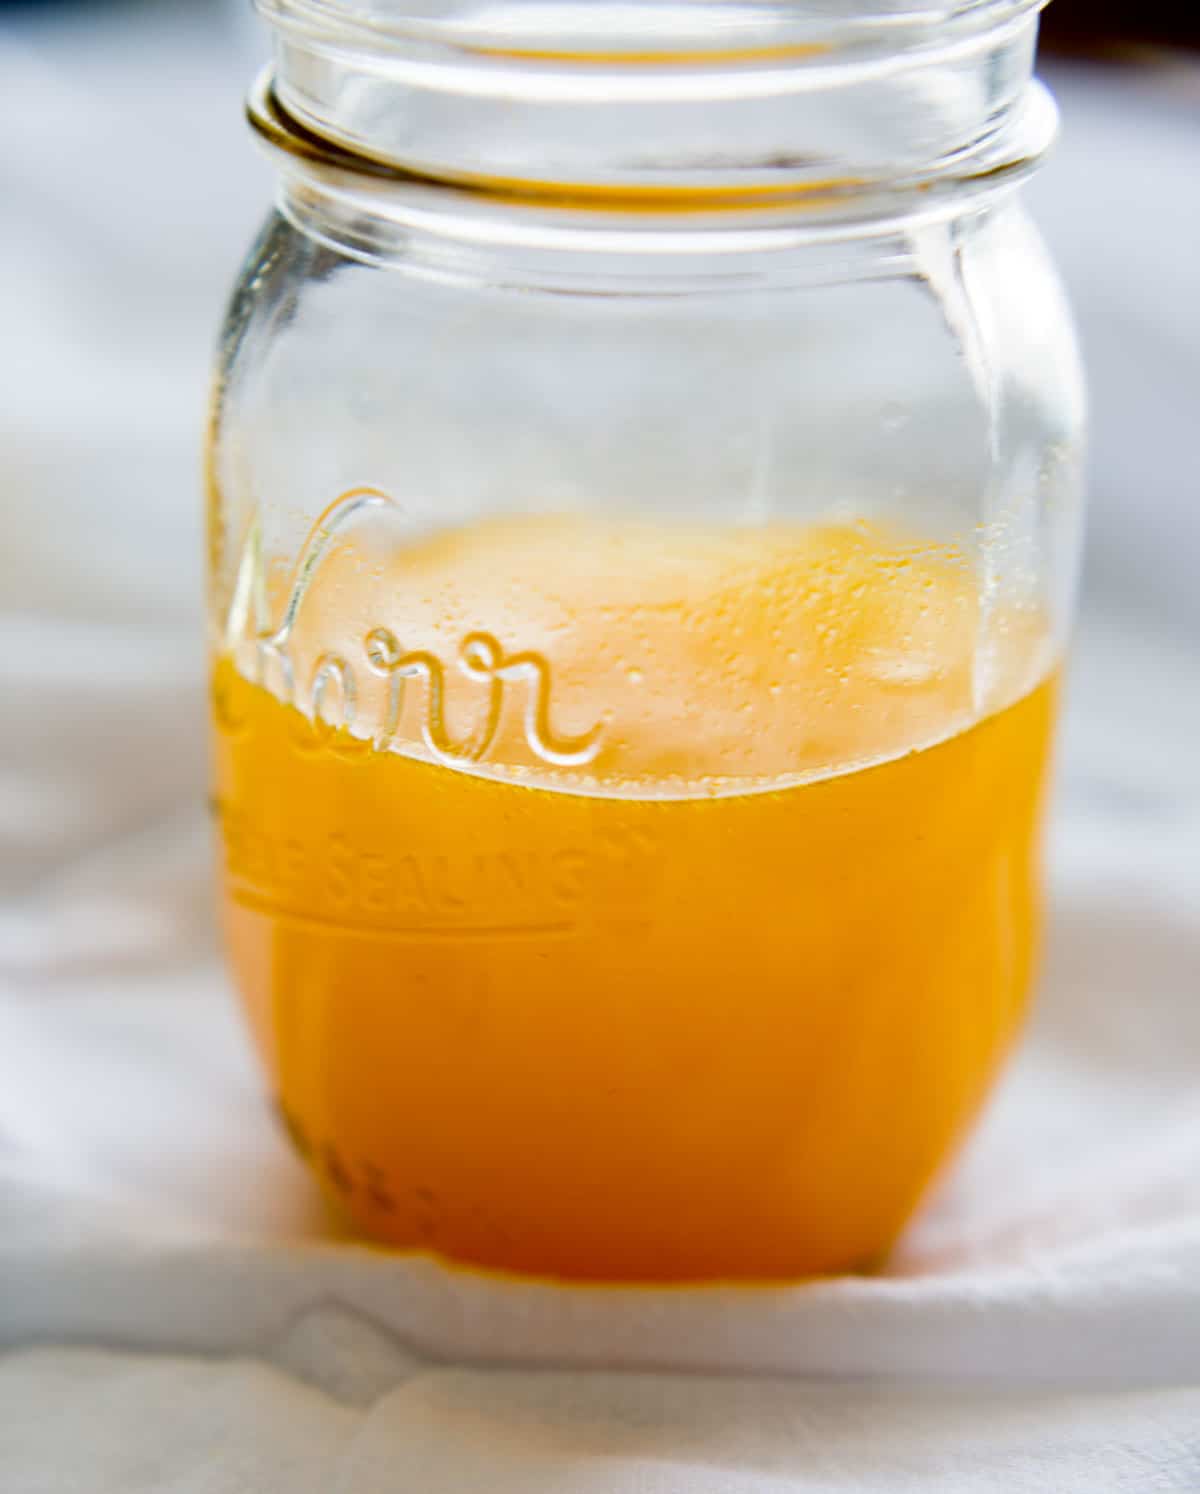 Morning Turmeric Detox Drink with apple cider vinegar, maple syrup and a pinch of cayenne. Lots of health benefits in this elixir to kickstart your day!